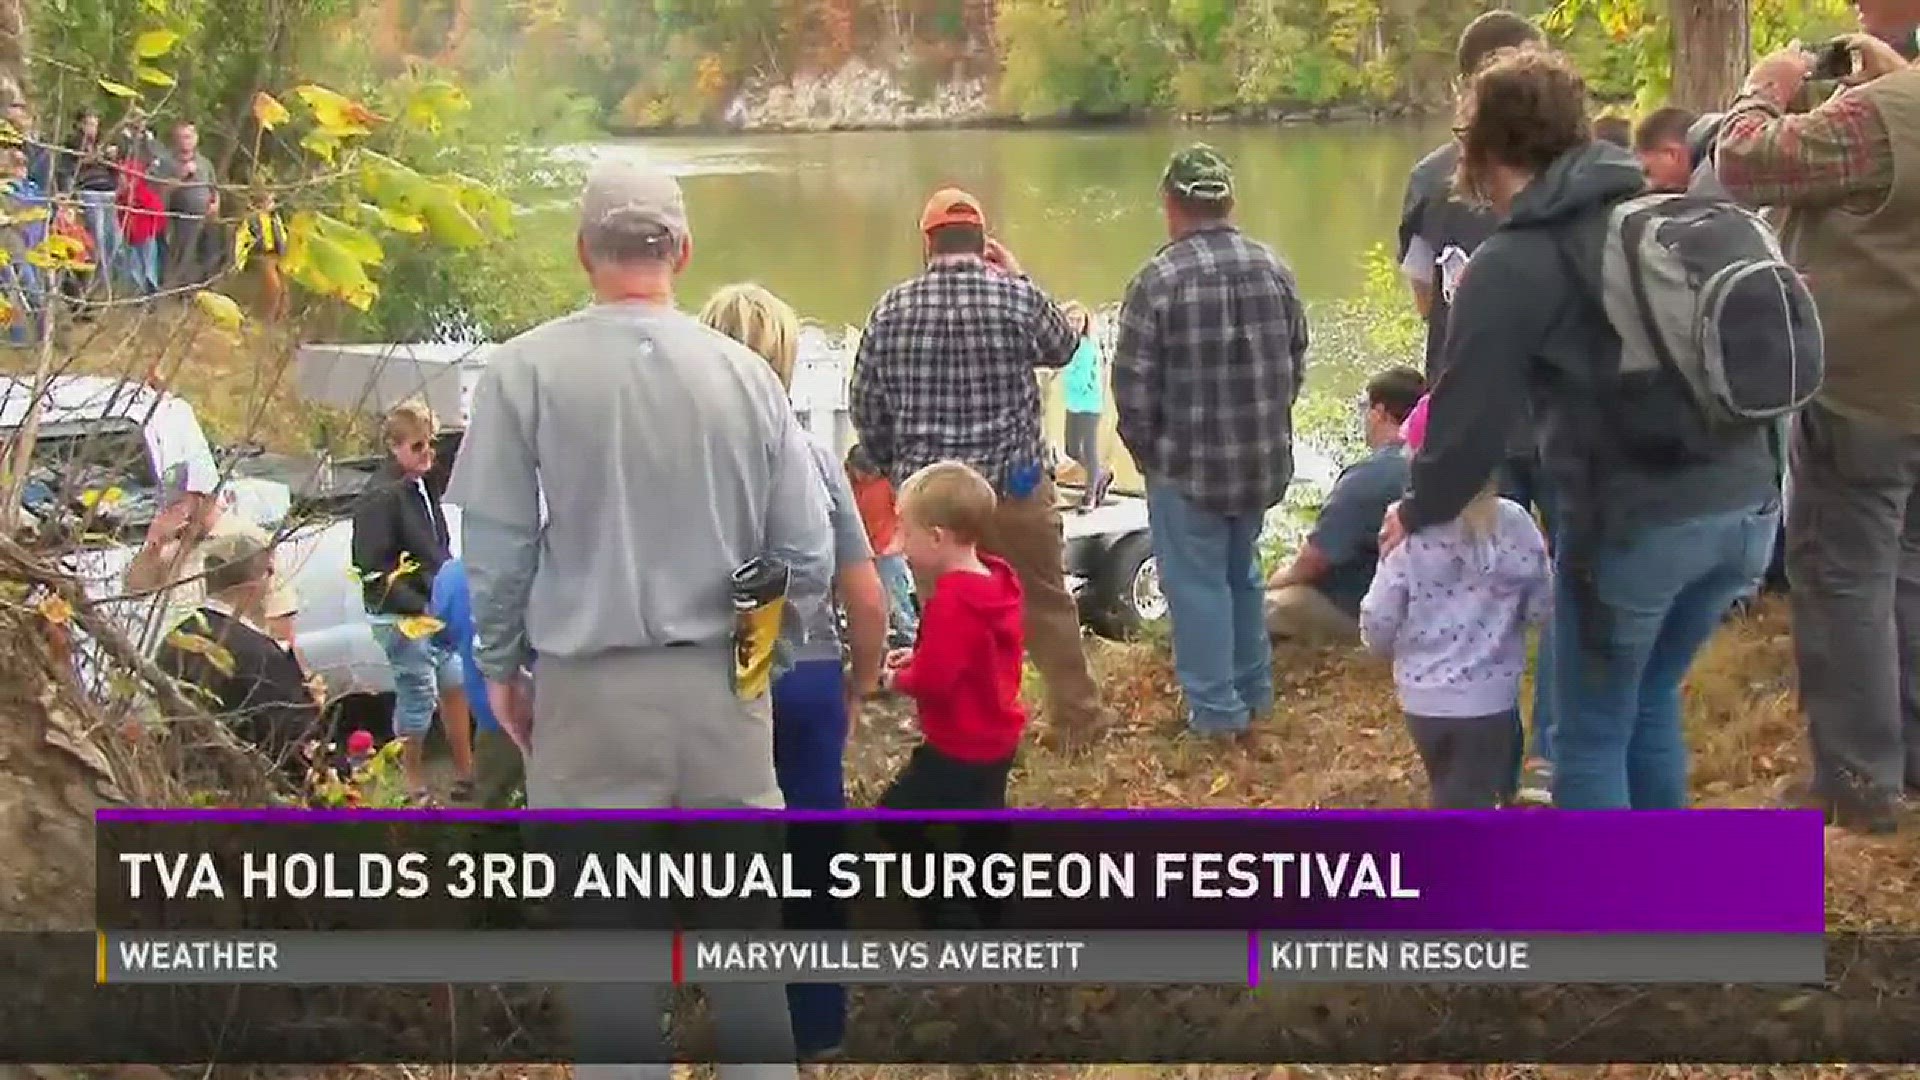 Oct. 22, 2016: TVA held its third annual Sturgeon Fest at Seven Islands State Birding Park where they released 2,000 lake sturgeon into the French Broad River.